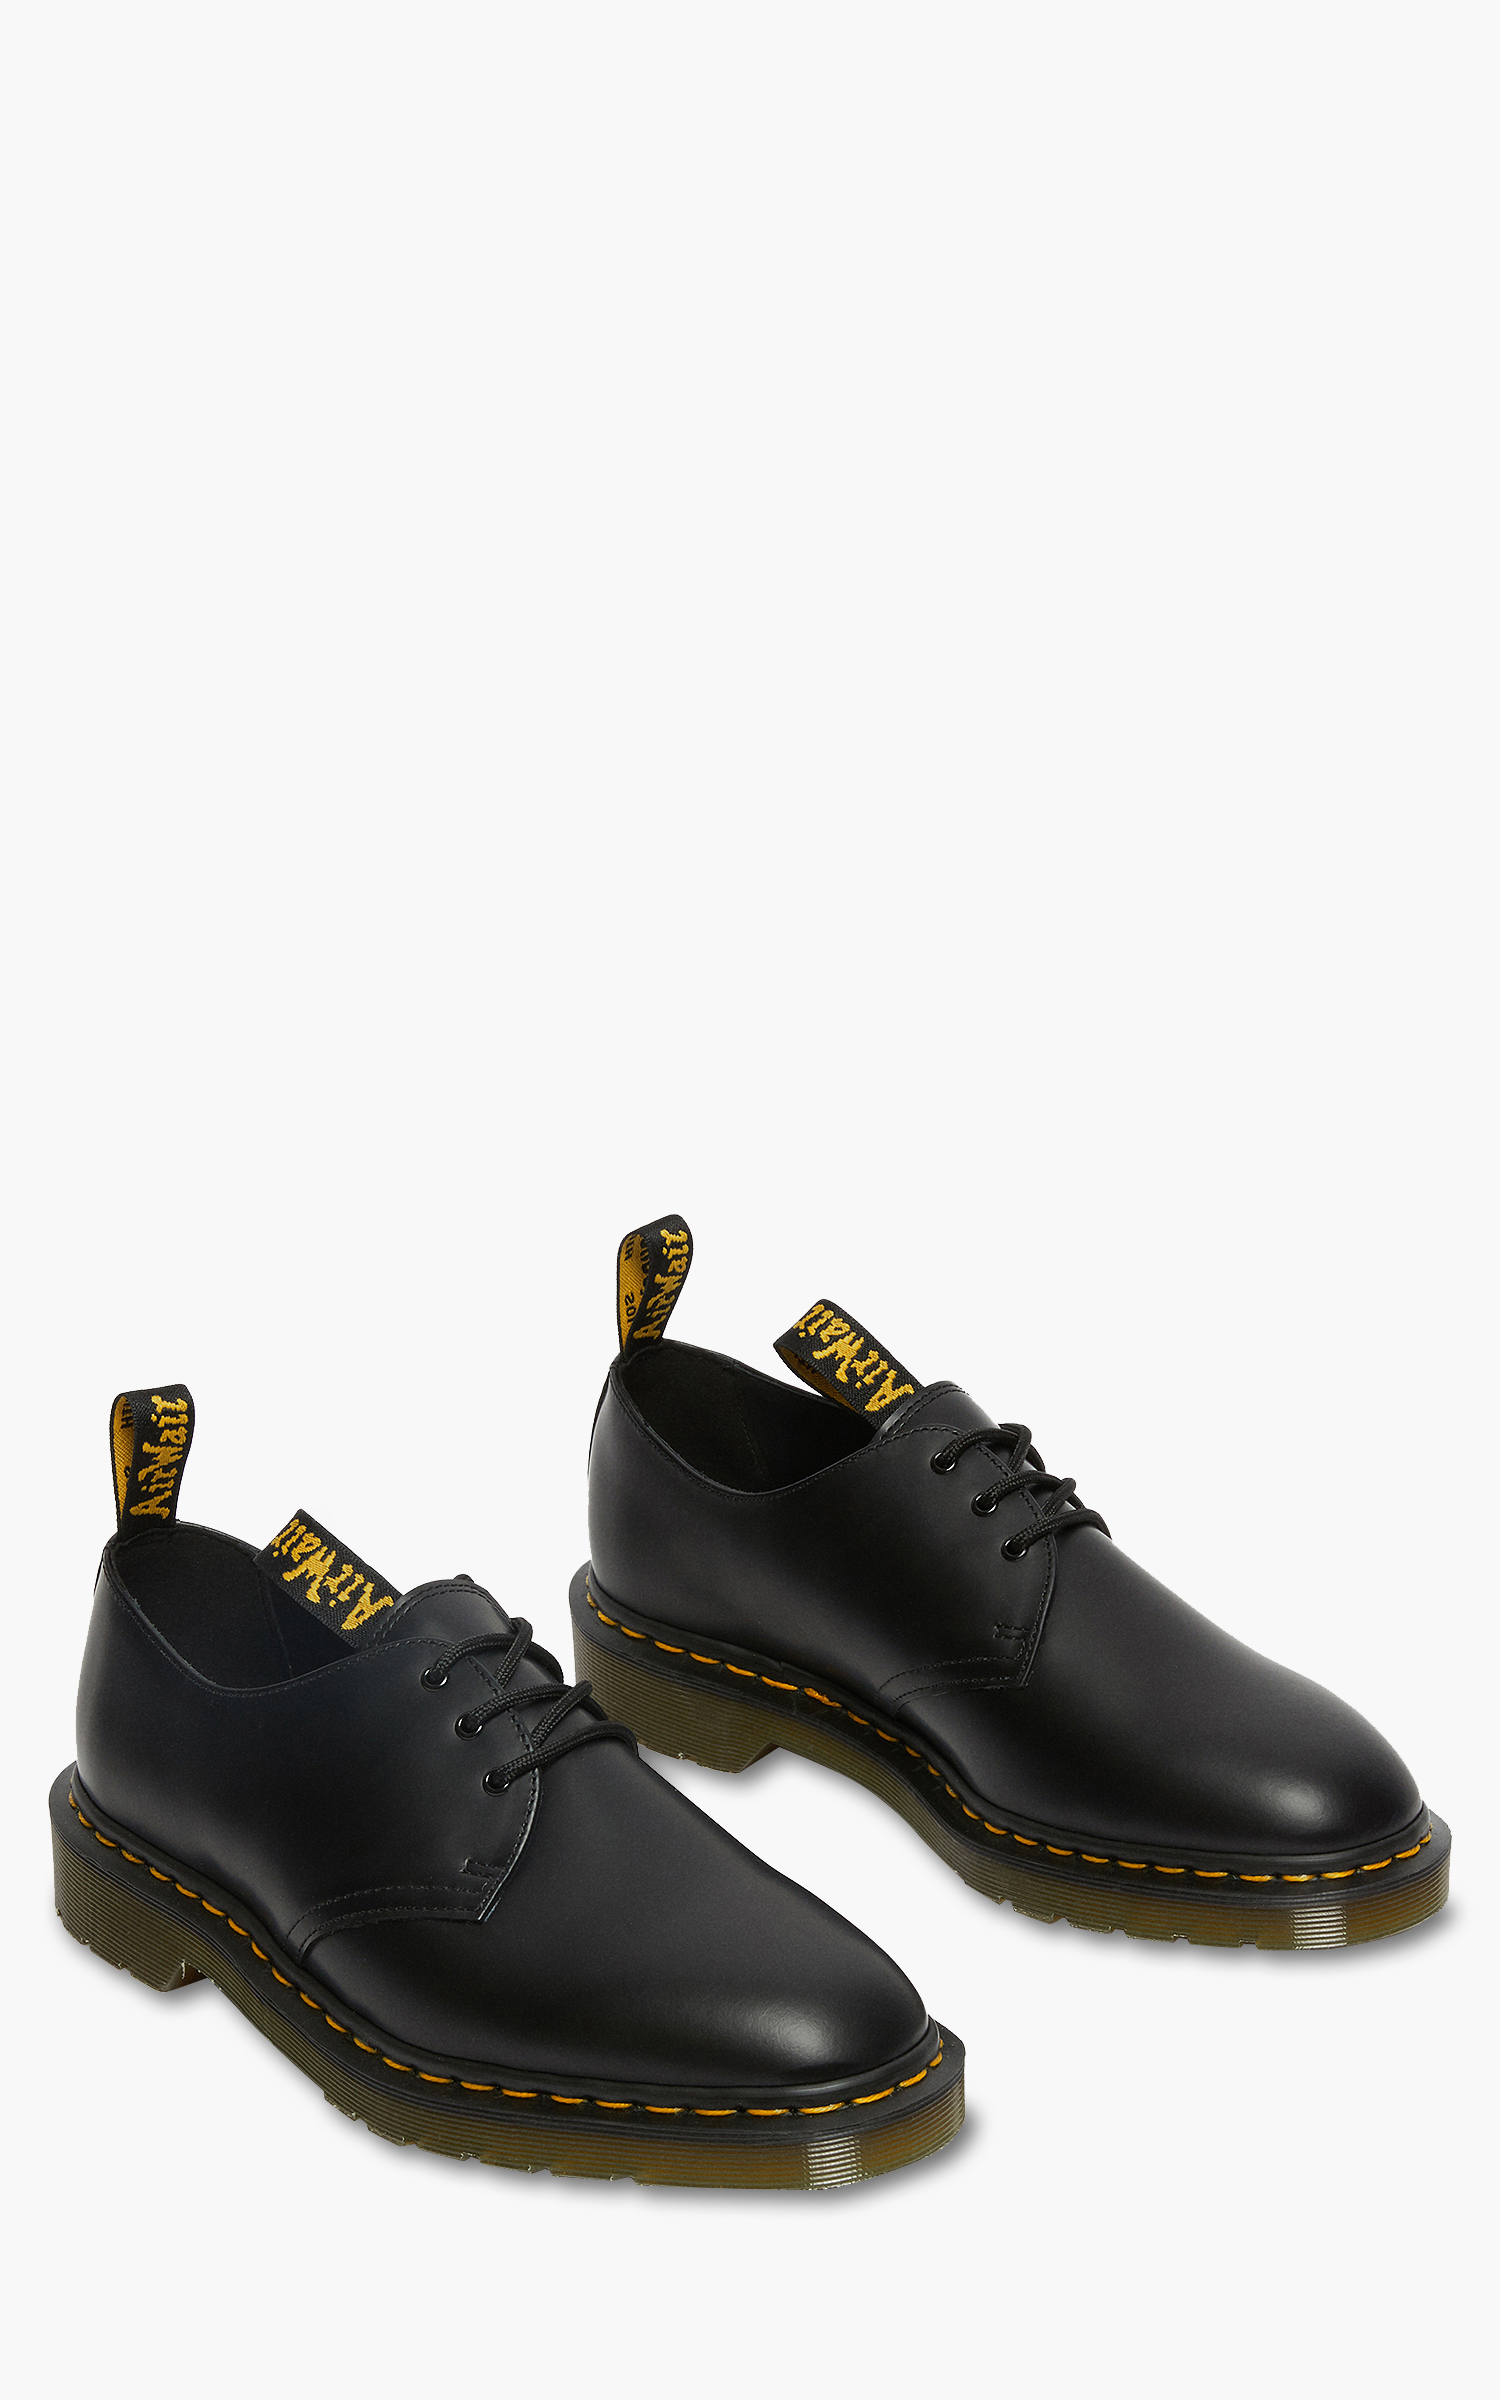 Dr. Martens x Engineered Garments 1461 Leather Lace Up Shoes Black ...